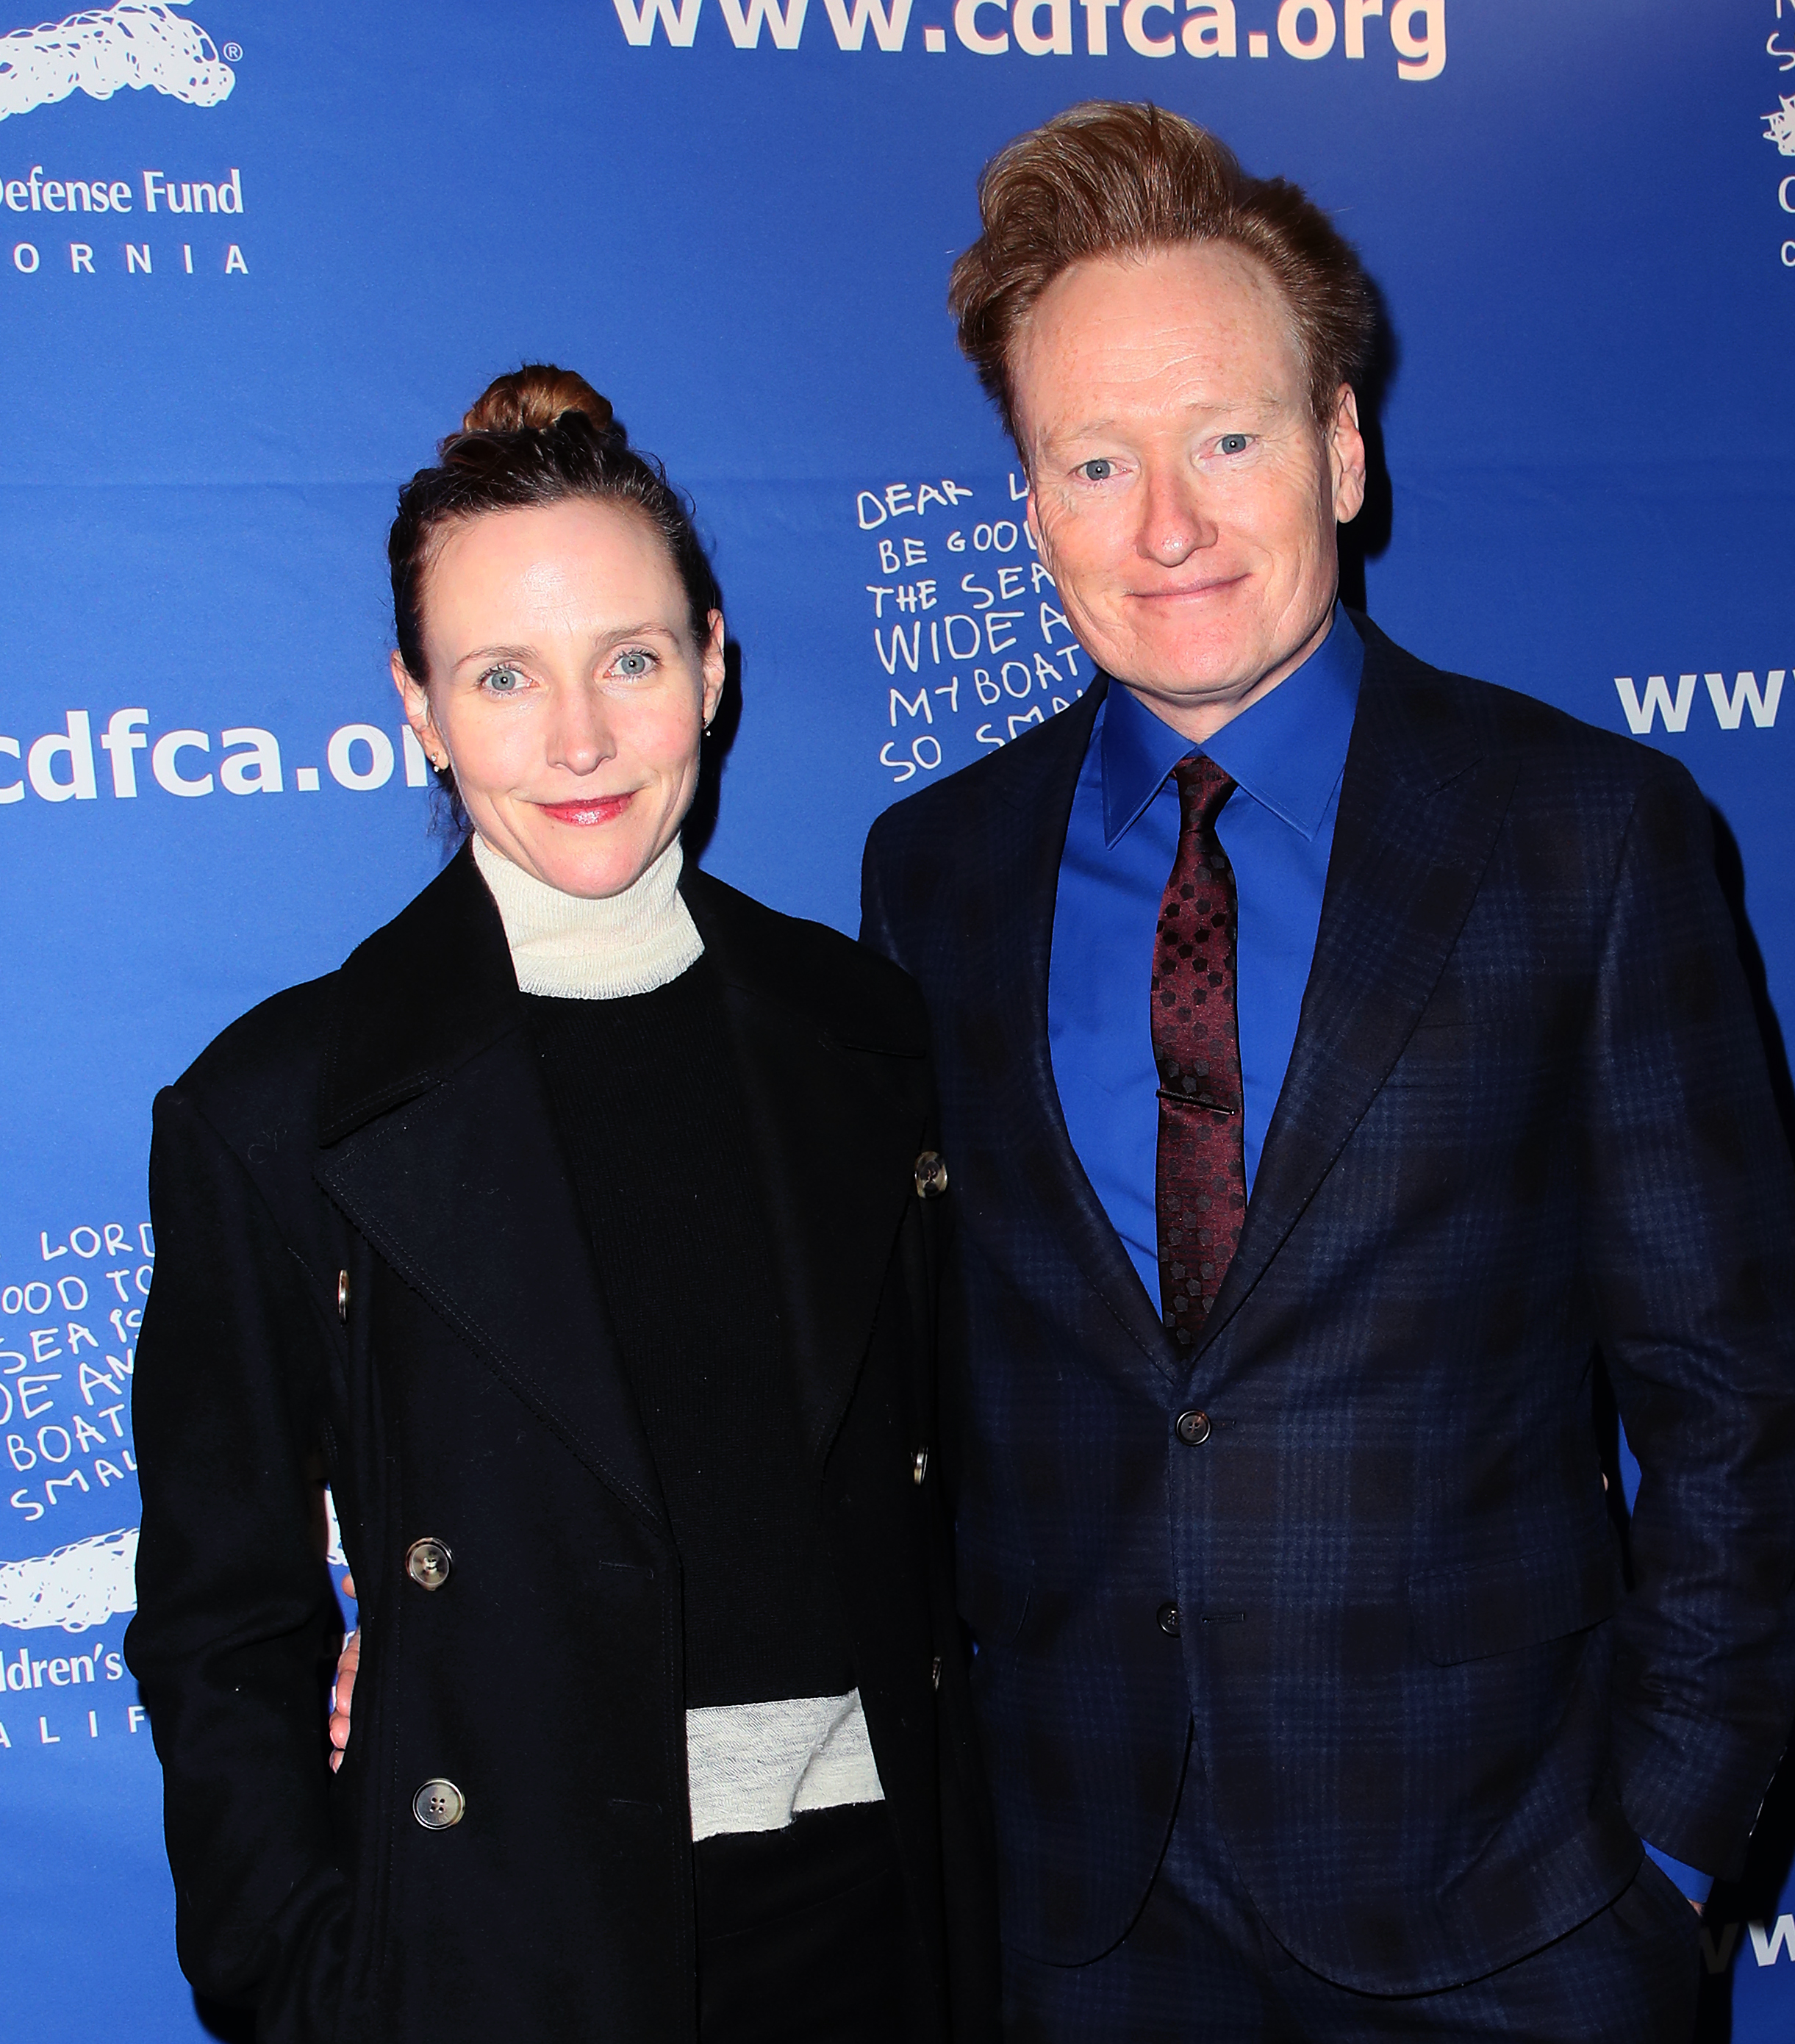 Liza Powel and Conan O'Brien at the Children's Defense Fund-California's 28th Annual Beat The Odds Awards on December 6, 2018, in Los Angeles | Source: Getty Images